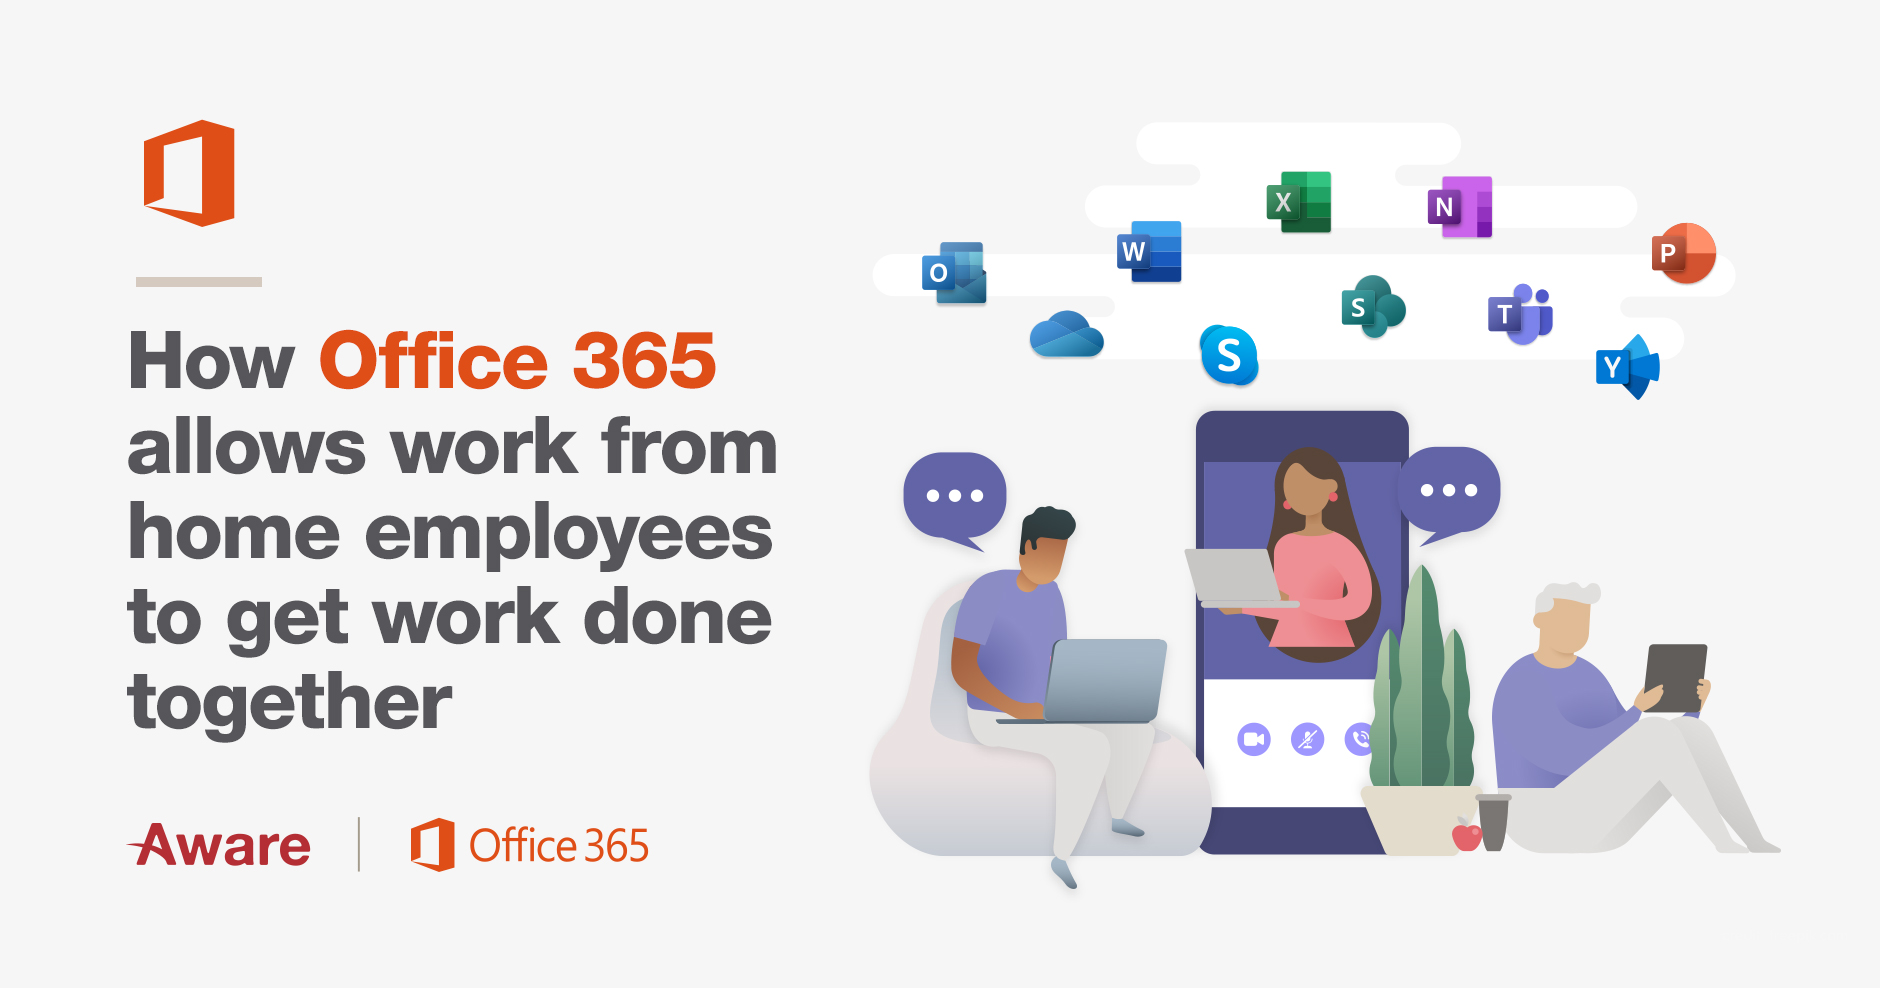 How Office 365 allows work from home employees to get work done together